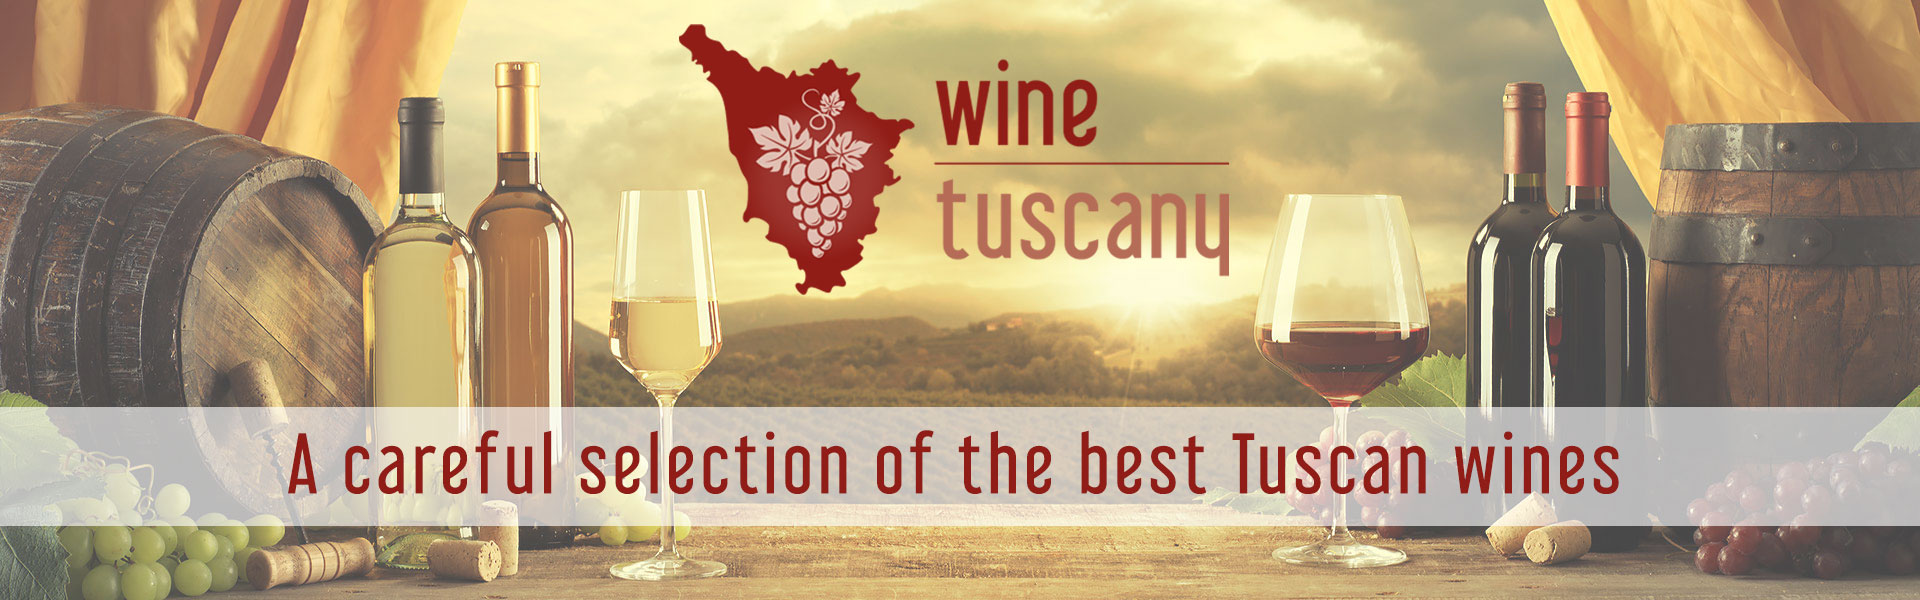 A careful selection of the best Tuscan wines